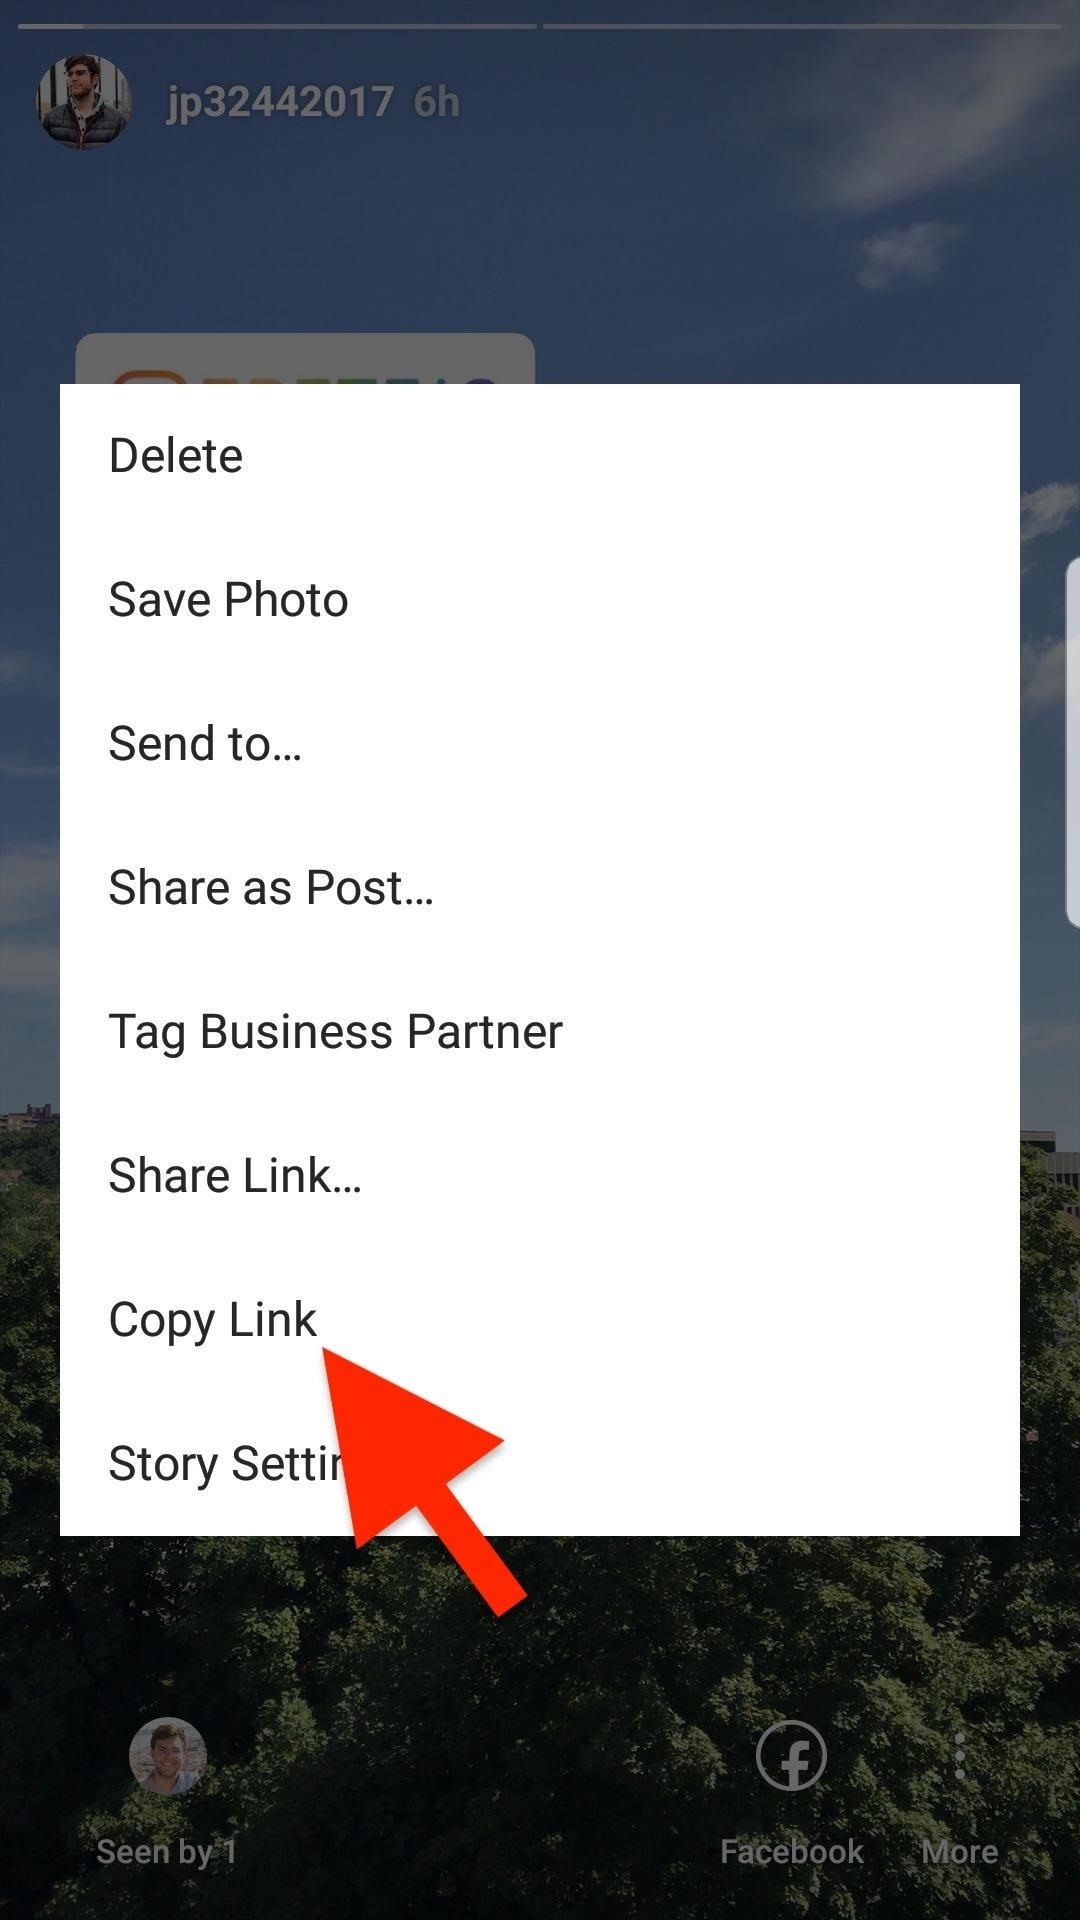 How to Copy & Share a Link to Your Instagram Story That You Can Post Anywhere